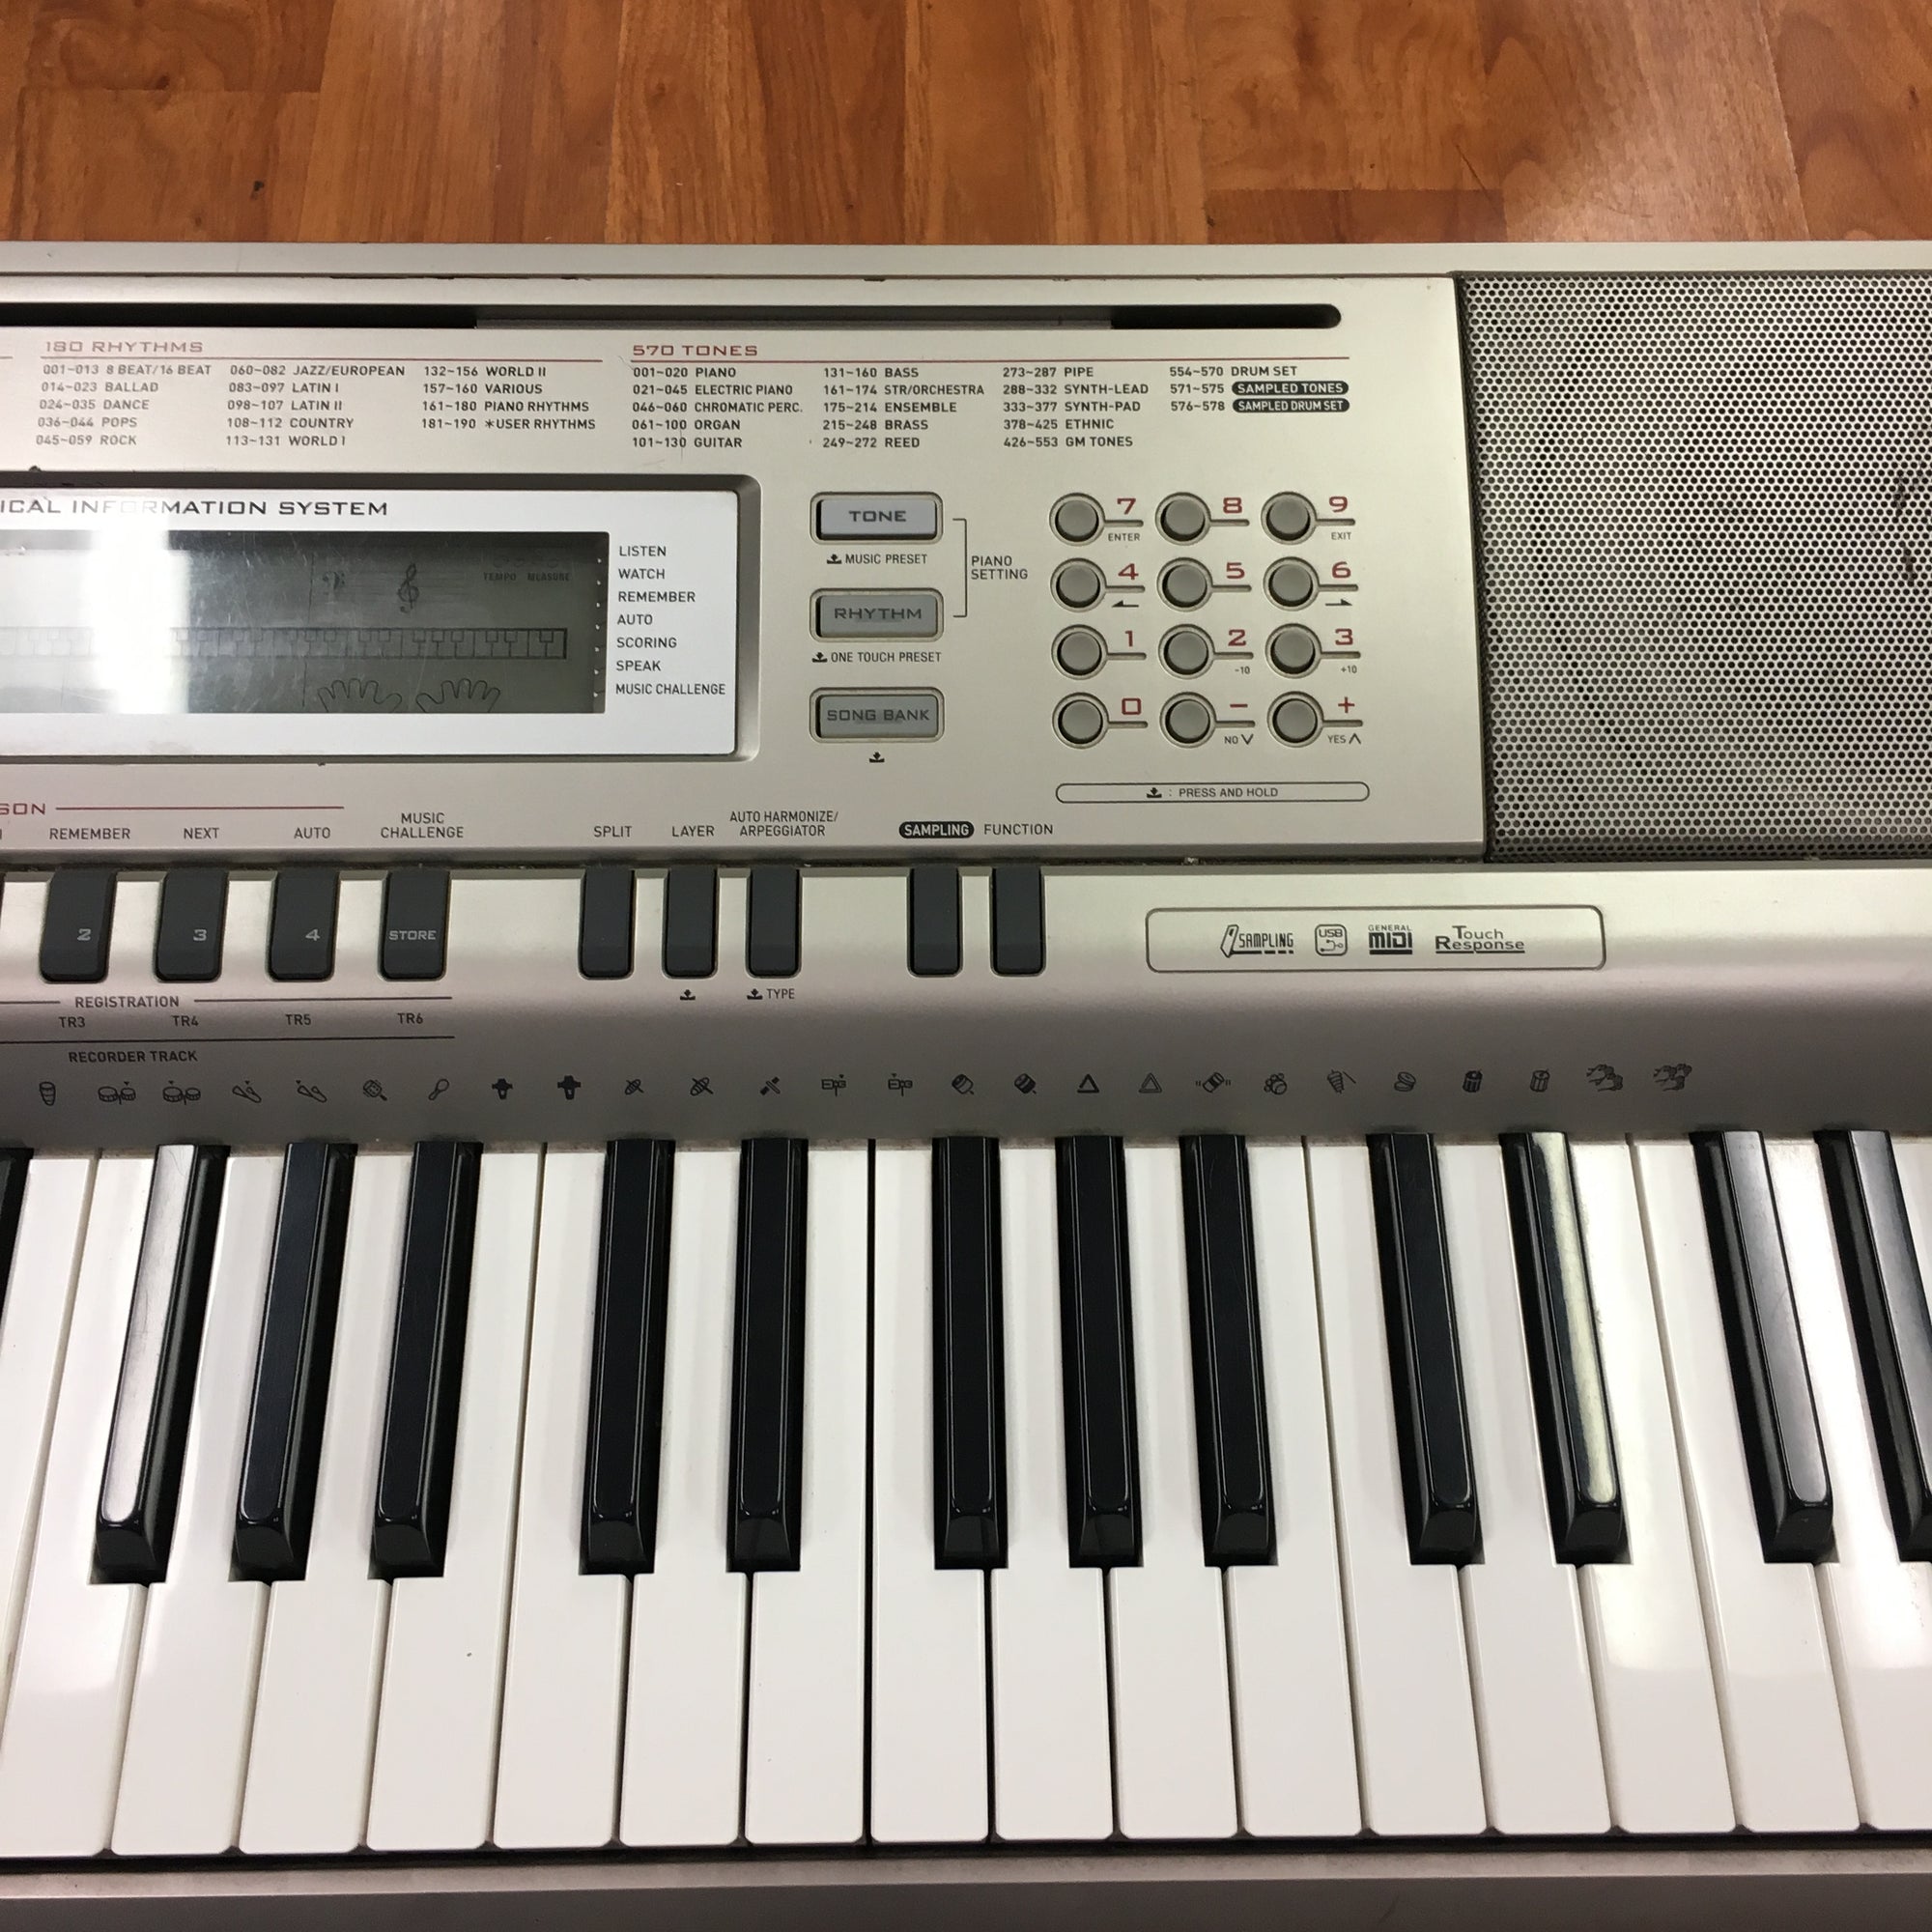 Review of the Casio WK-200 Keyboard